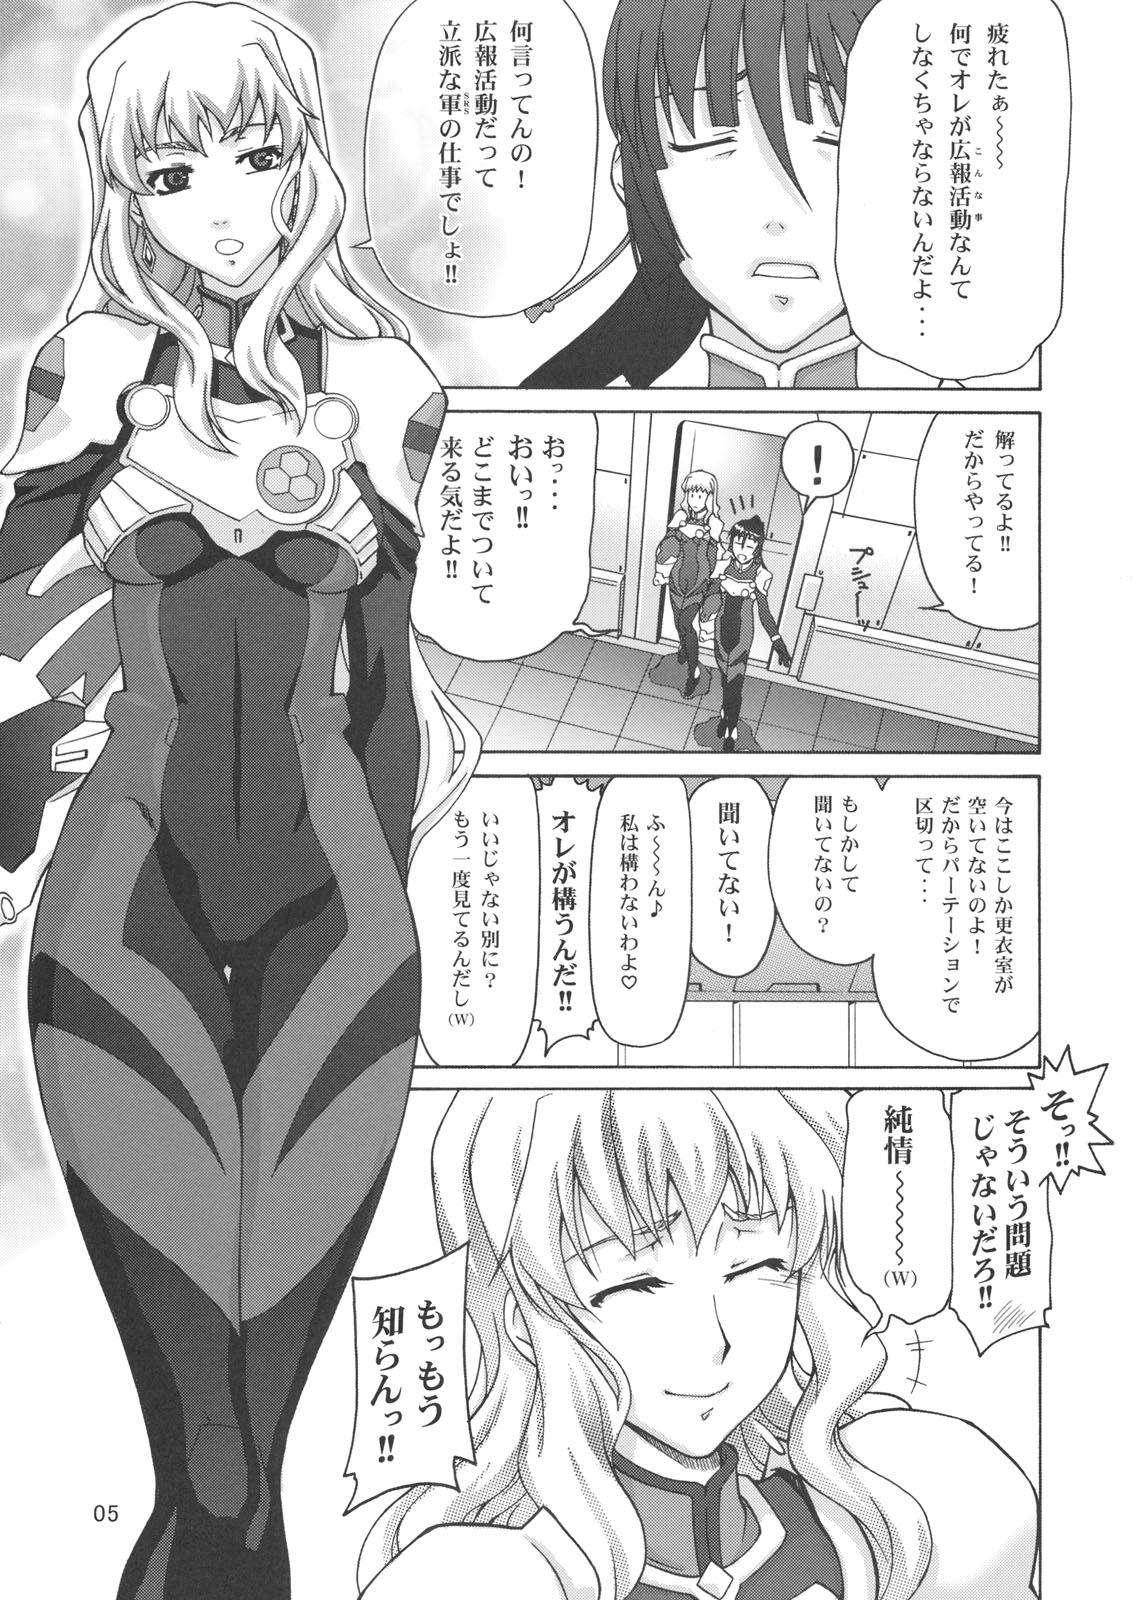 Suck TSUNDERE Frontier - Macross frontier Gay Largedick - Page 4